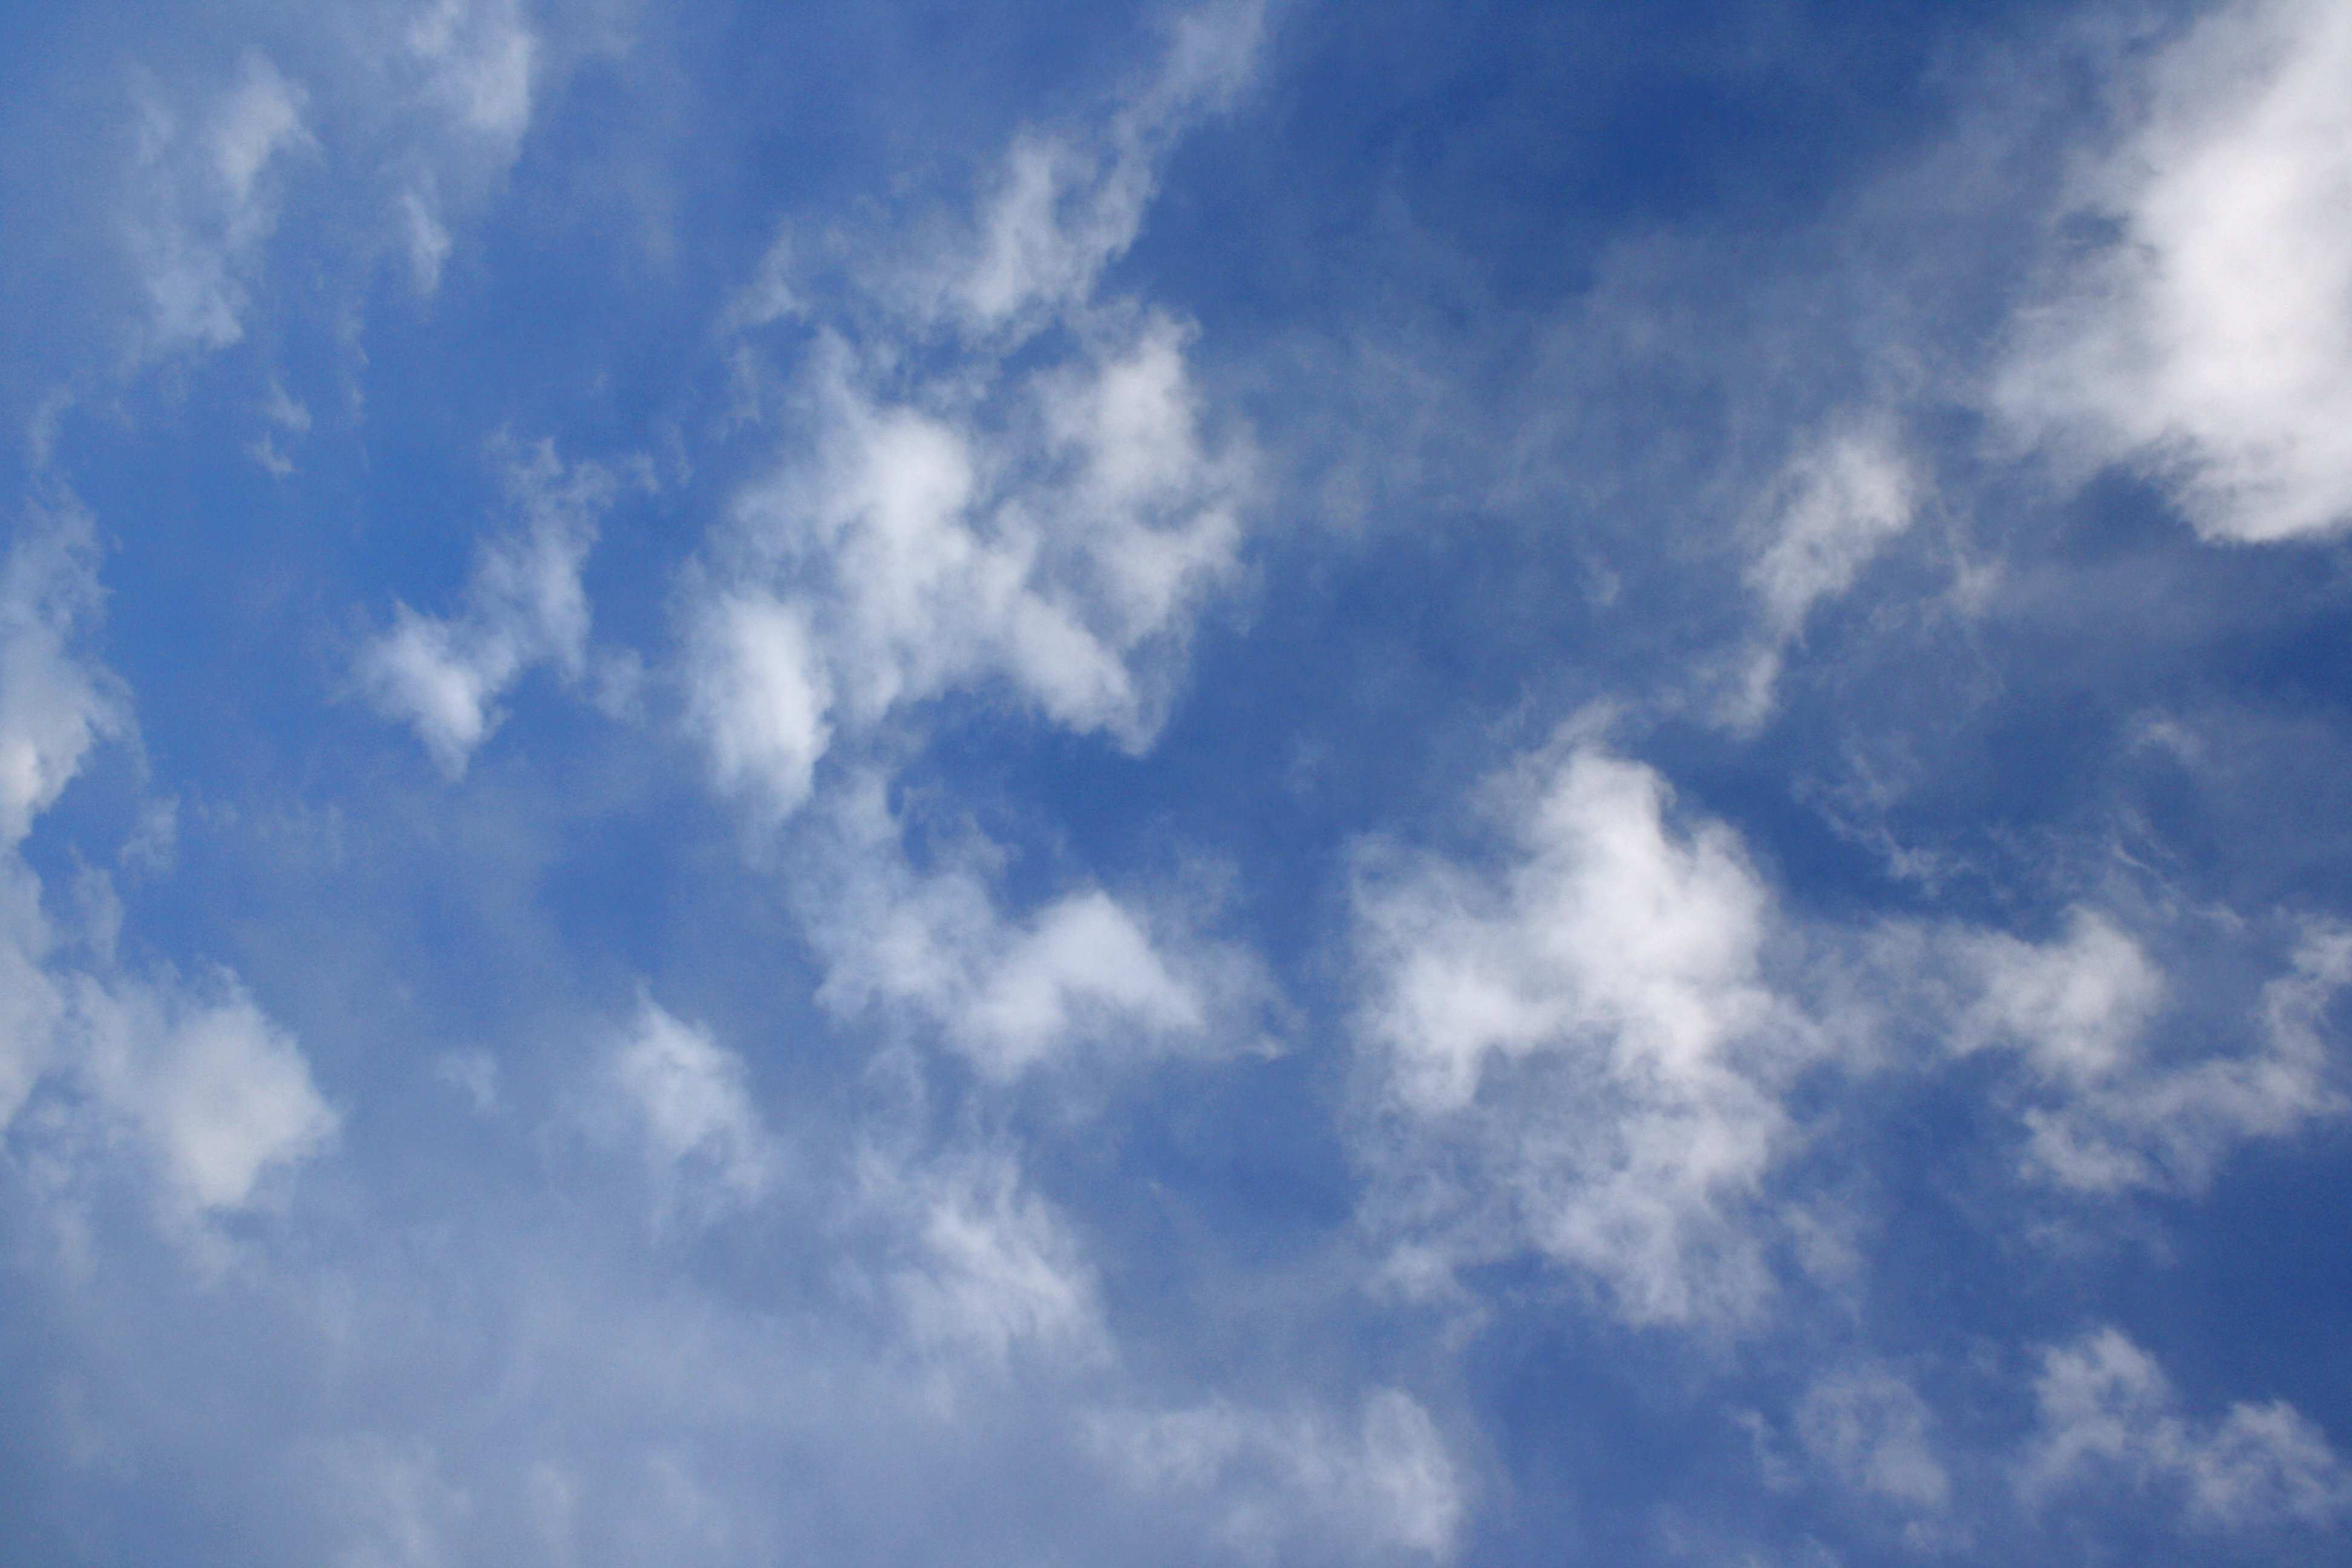 Blue Sky with White Clouds Texture Picture | Free Photograph | Photos